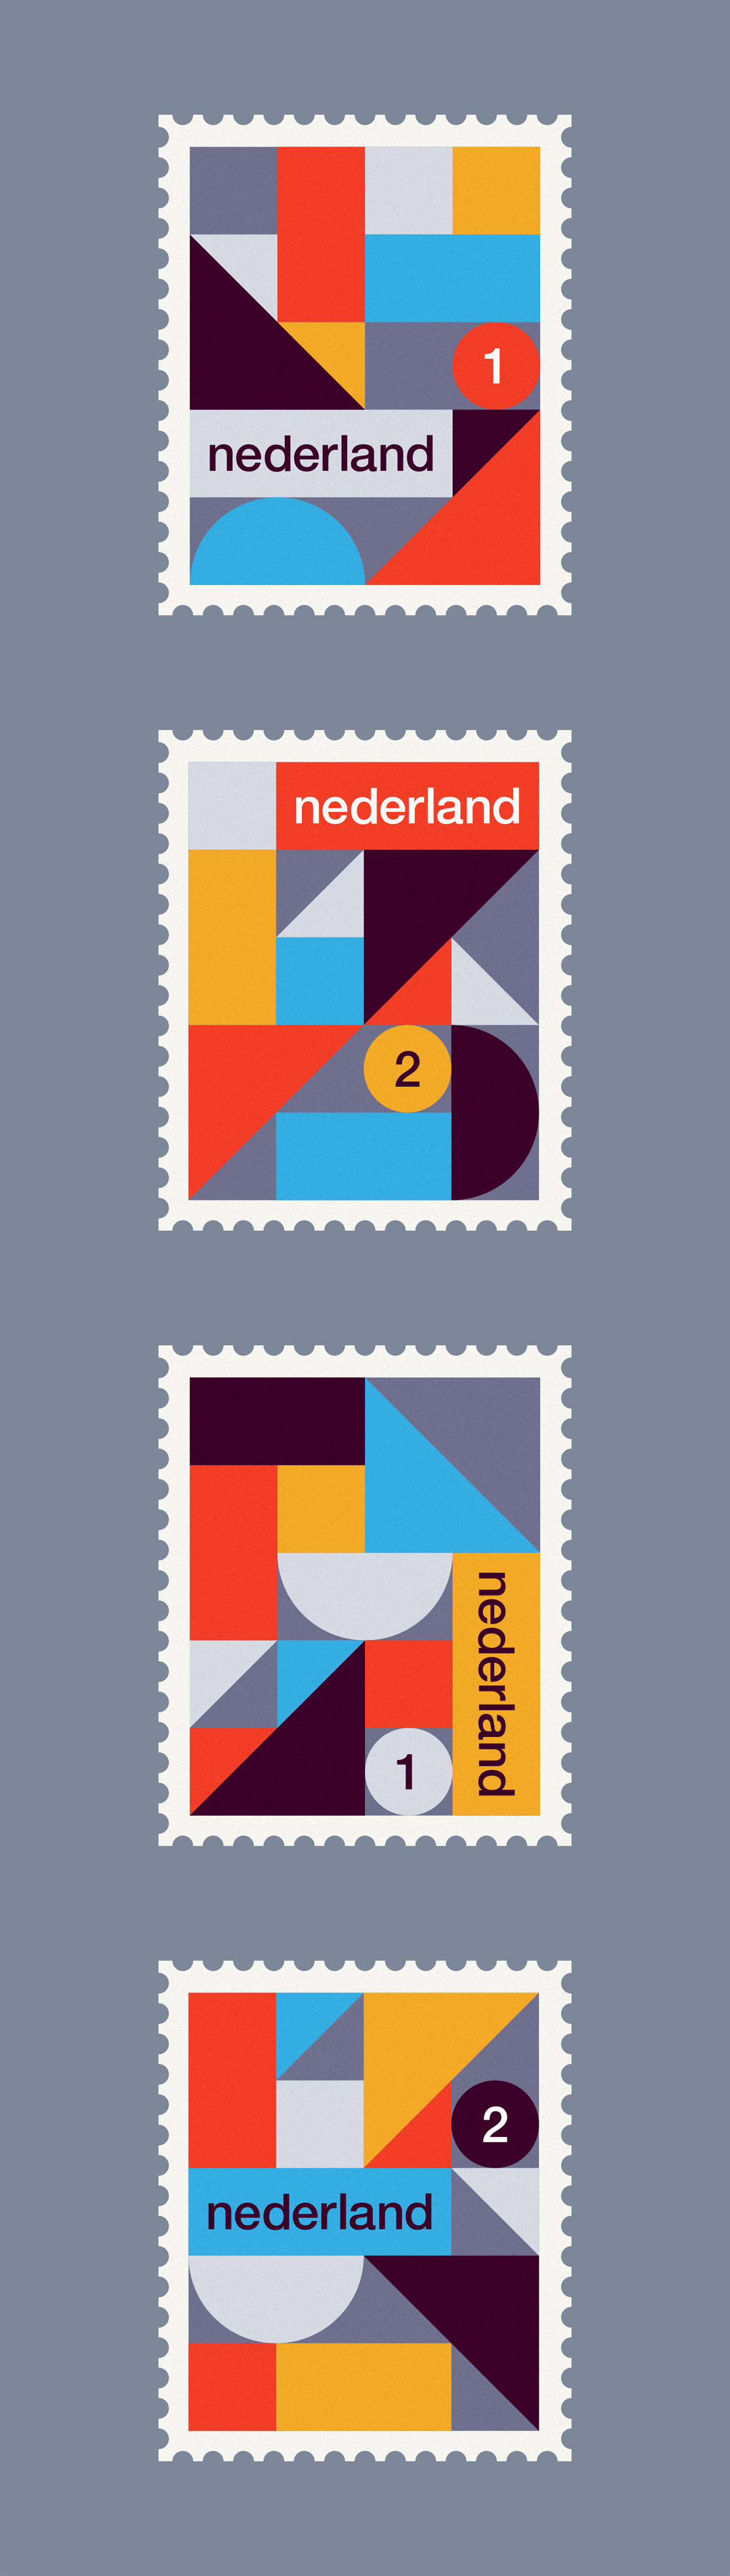 Dutch Stamps, a graphic design series by Rick Jordens.